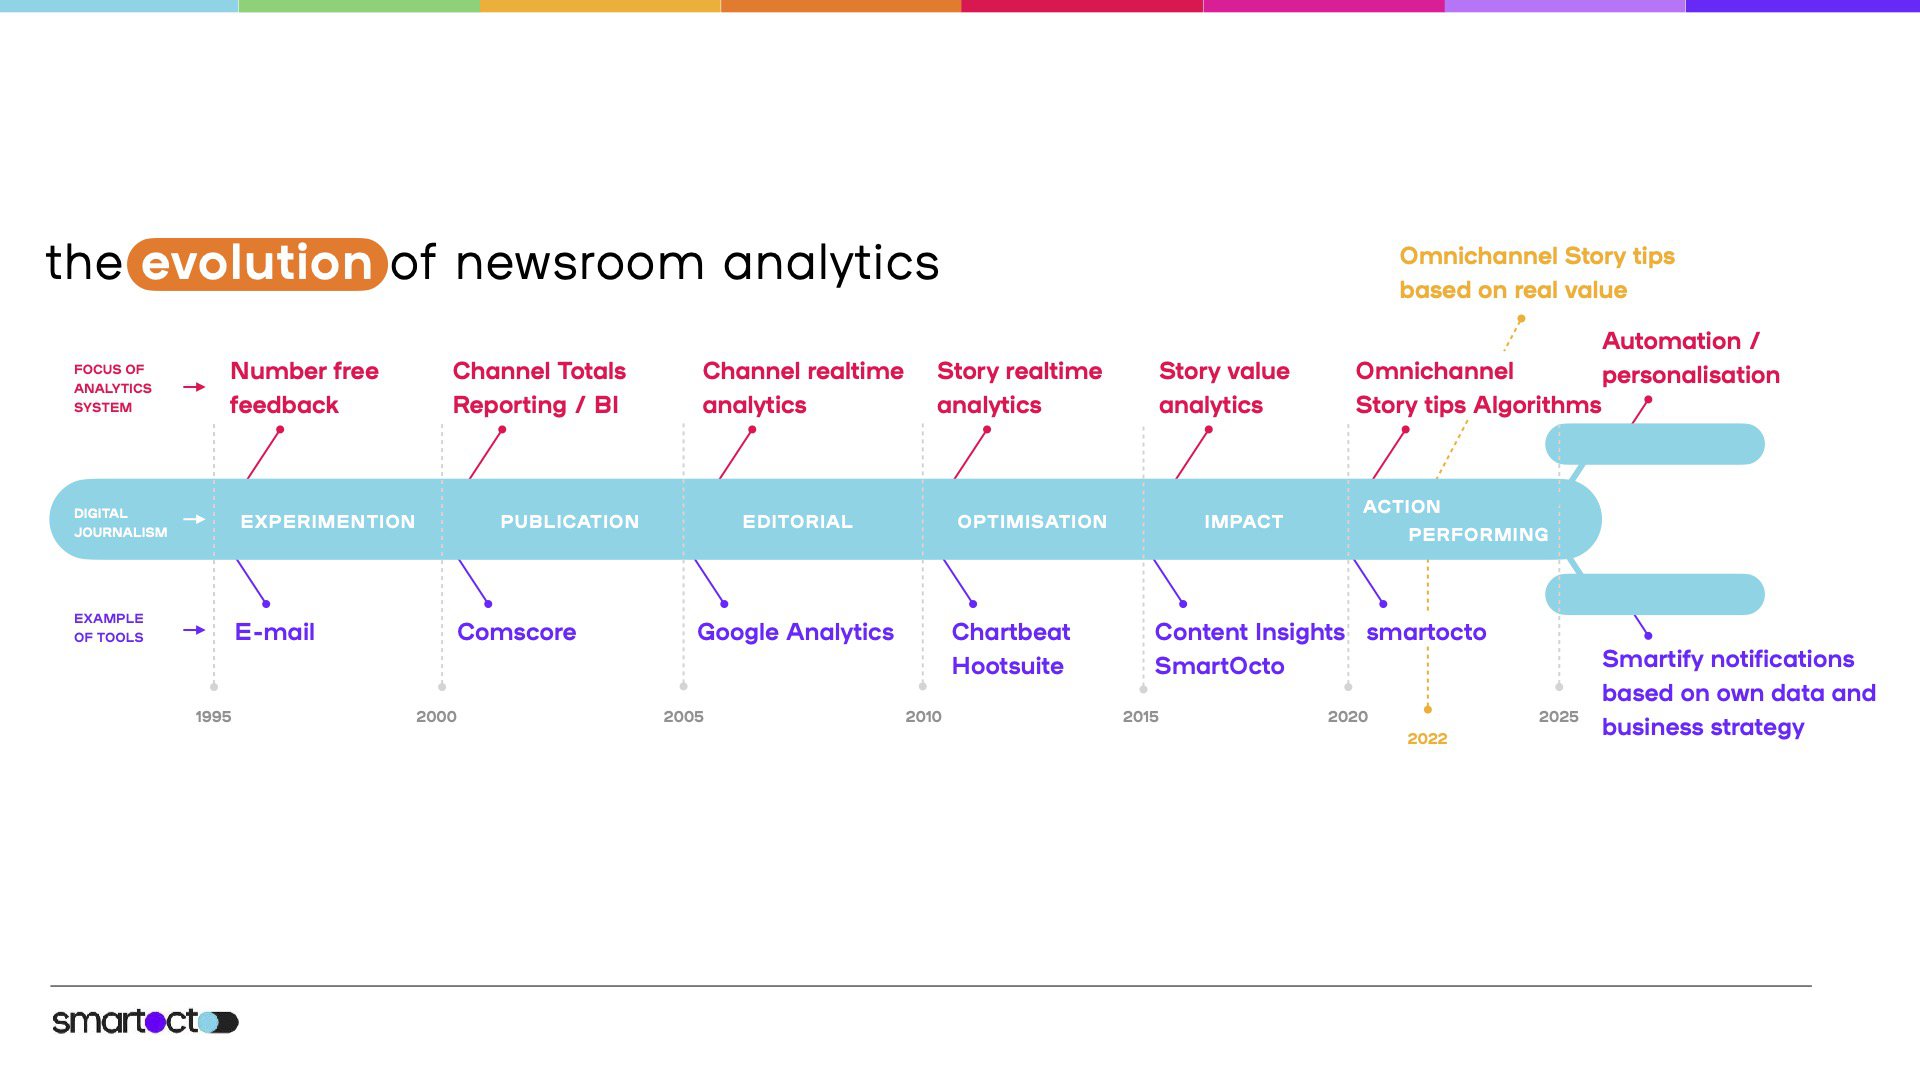 The evolution of analytics visualised in a timeline graph